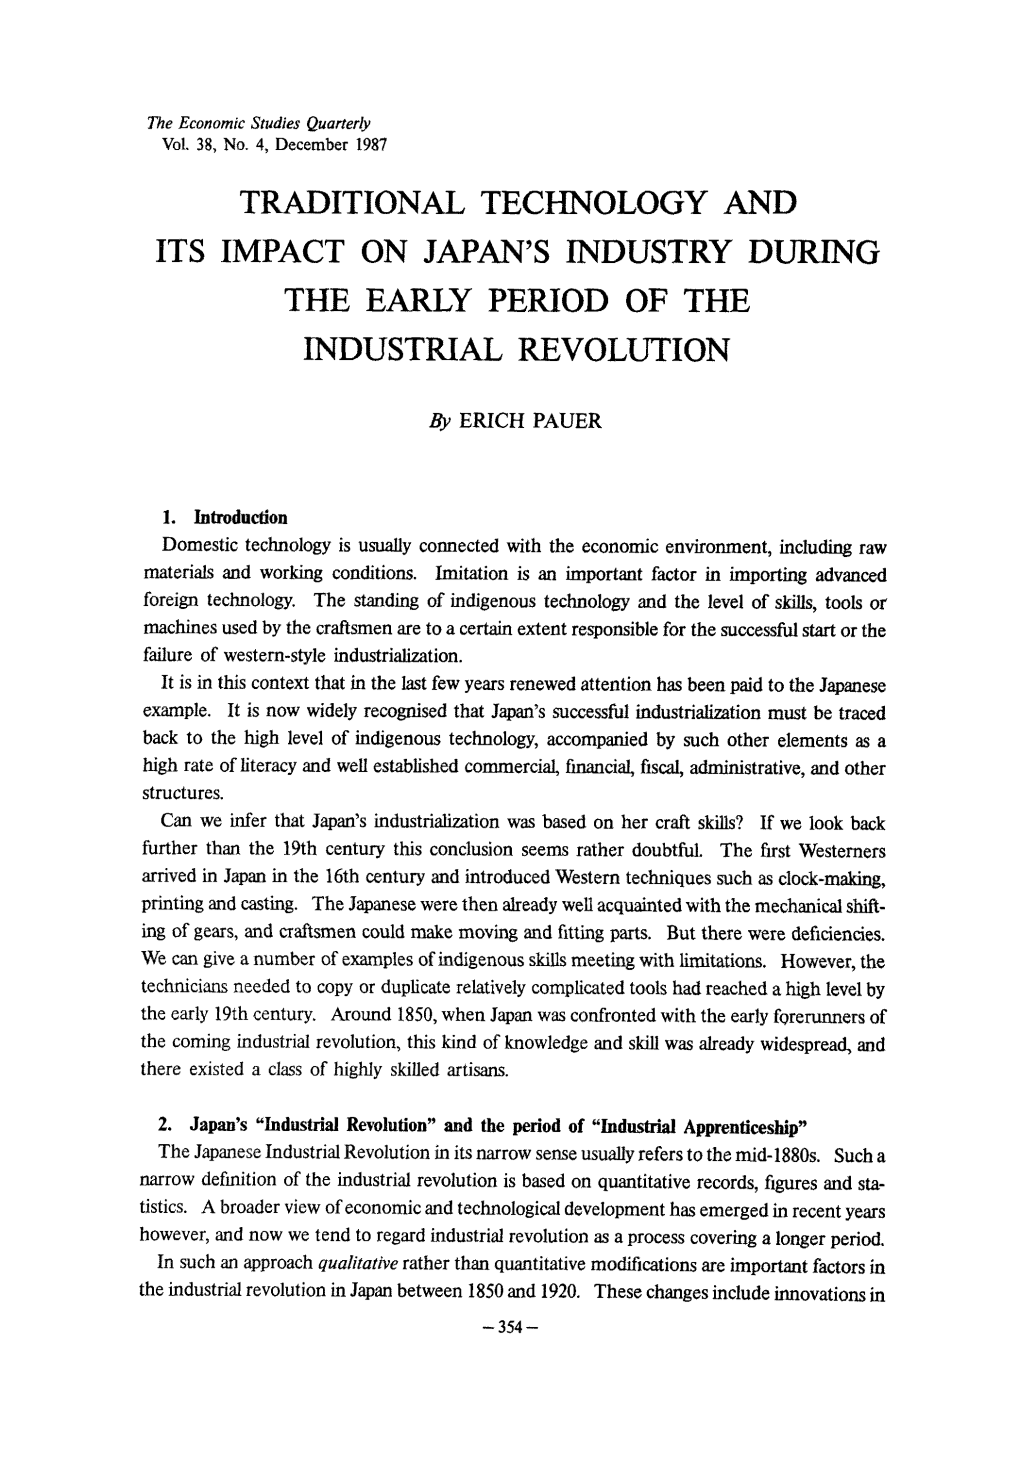 Traditional Technology and Its Impact on Japan's Industry During the Early Period of the Industrial Revolution